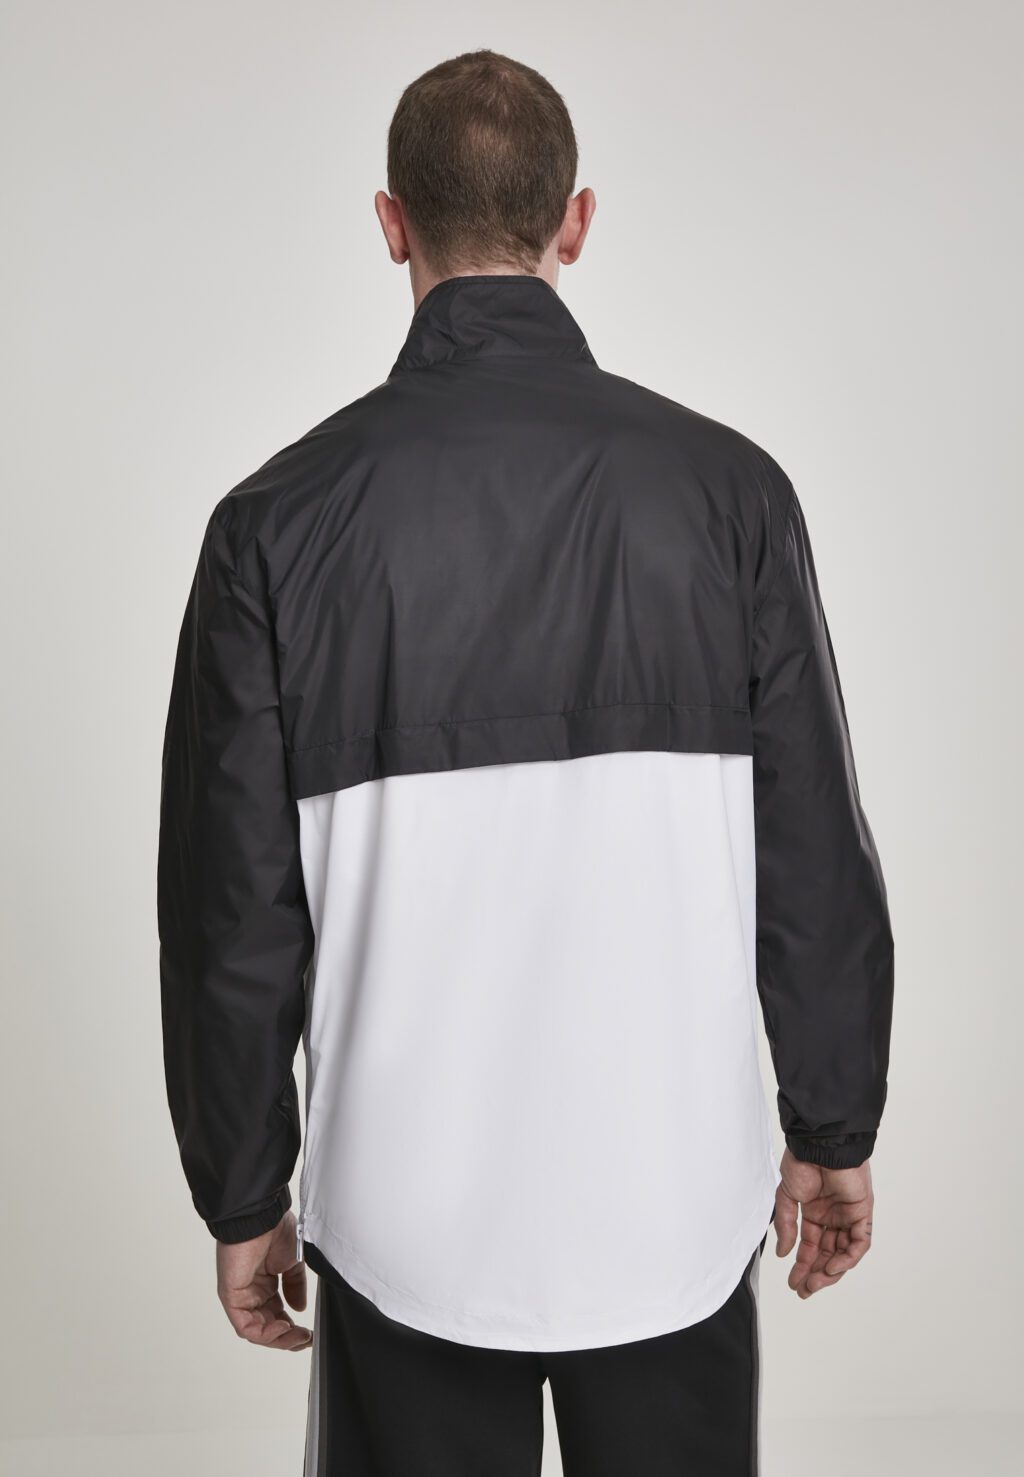 Urban Classics Stand Up Collar Pull Over Jacket blk/wht TB2748